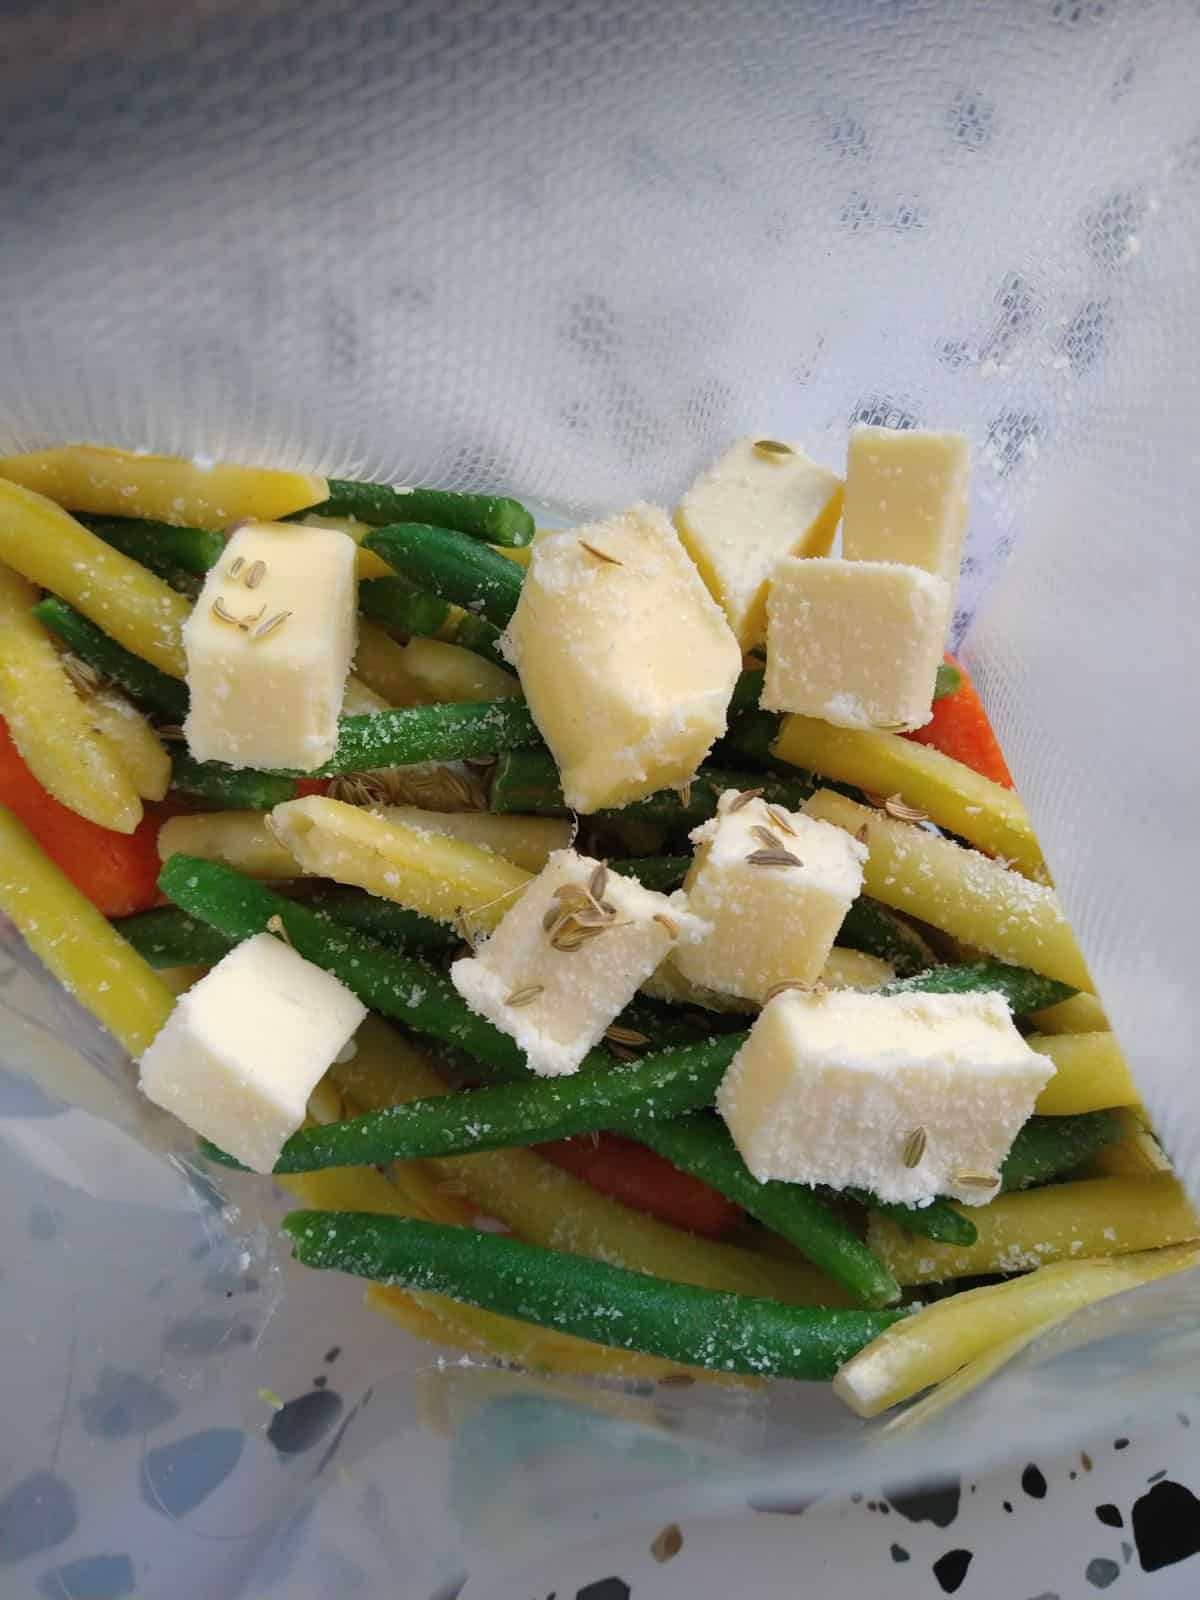 An opened plastic sous vide bag with cold butter, frozen wax beans, green beans, and baby carrots along with fennel seeds.